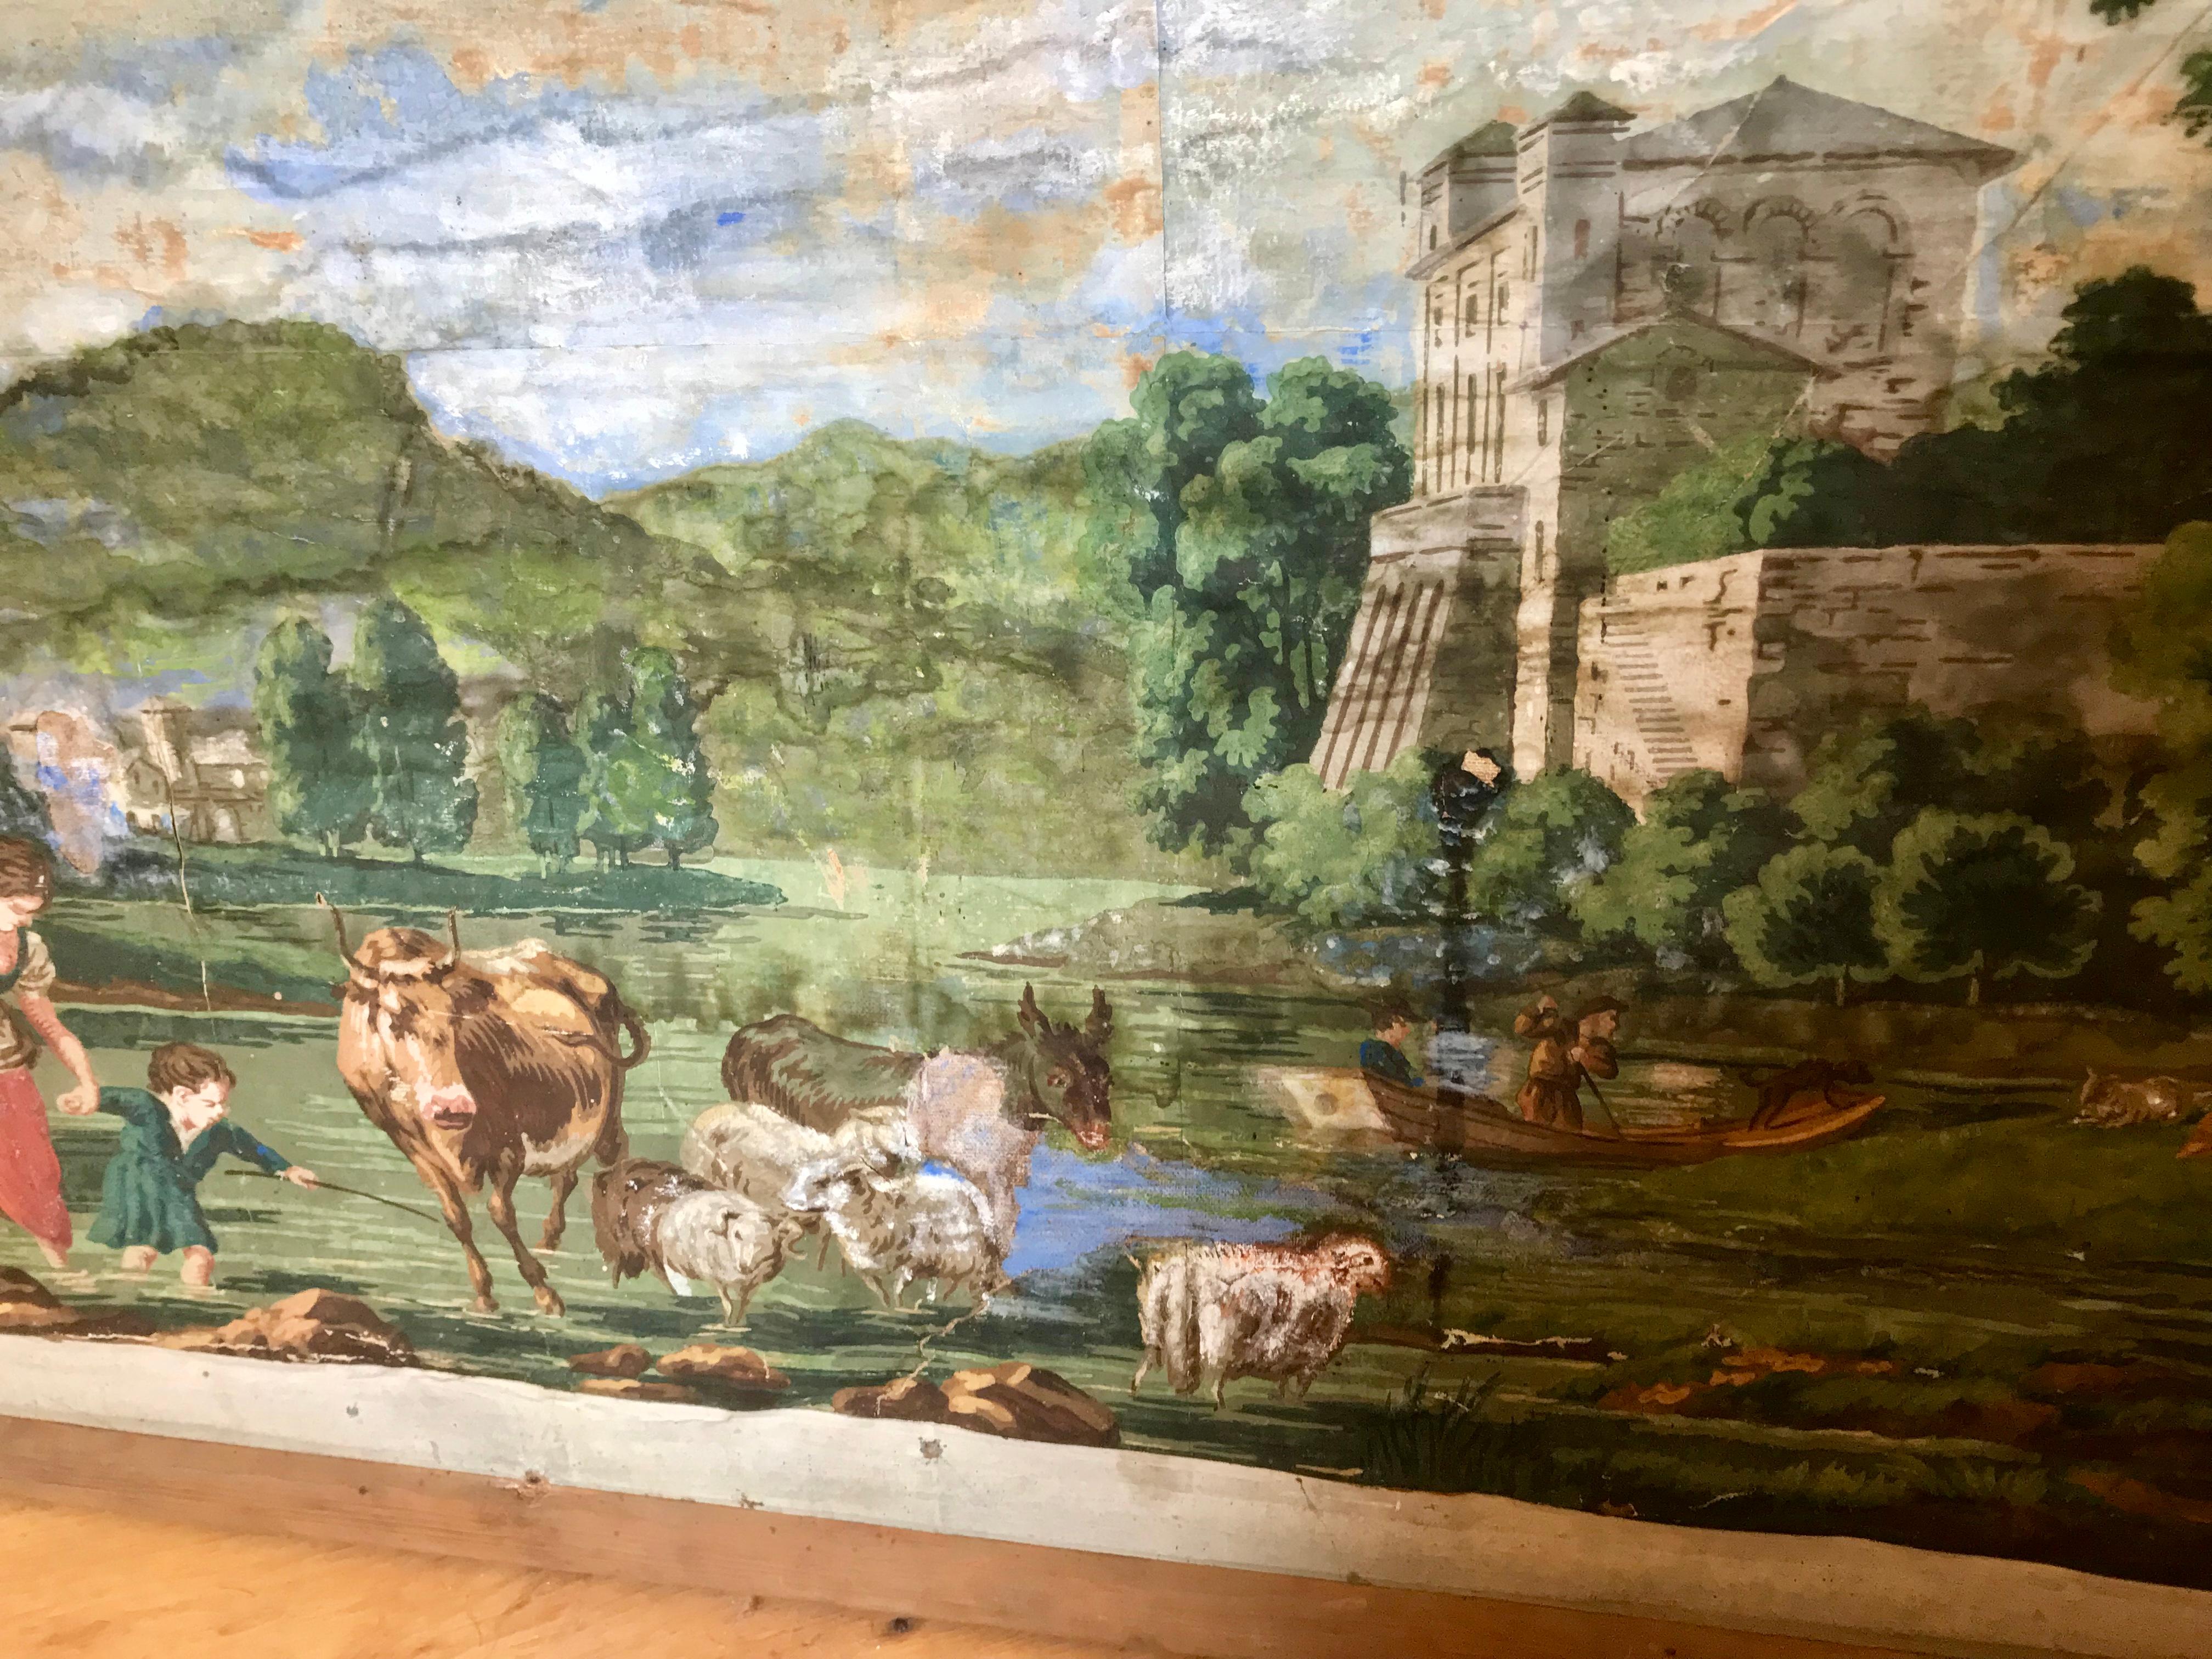 French wallpaper panel on pine board fireboard.

Pastoral scene. Original backboard. Used for summer closing of a New England fireplace. Early 19th century.

Though lifting and some damage, the colors remain vibrant and the paper which is